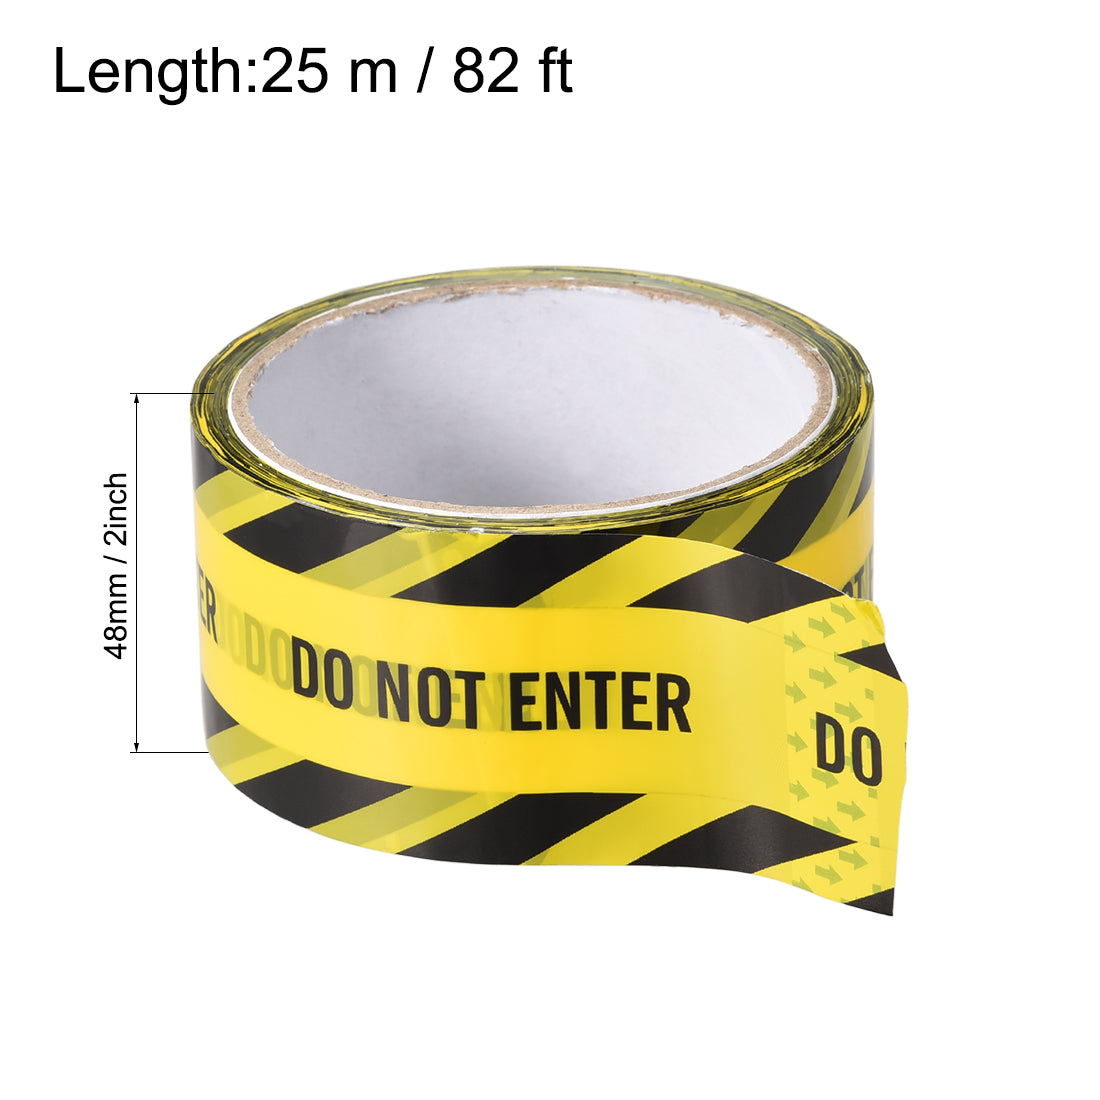 uxcell Uxcell Caution Warning Stripe Sticker Adhesive Tape DO NOT ENTER Marking, 82 Ft x 2 Inch(LxW), Yellow Black for Workplace Wet Floor Caution 2pcs